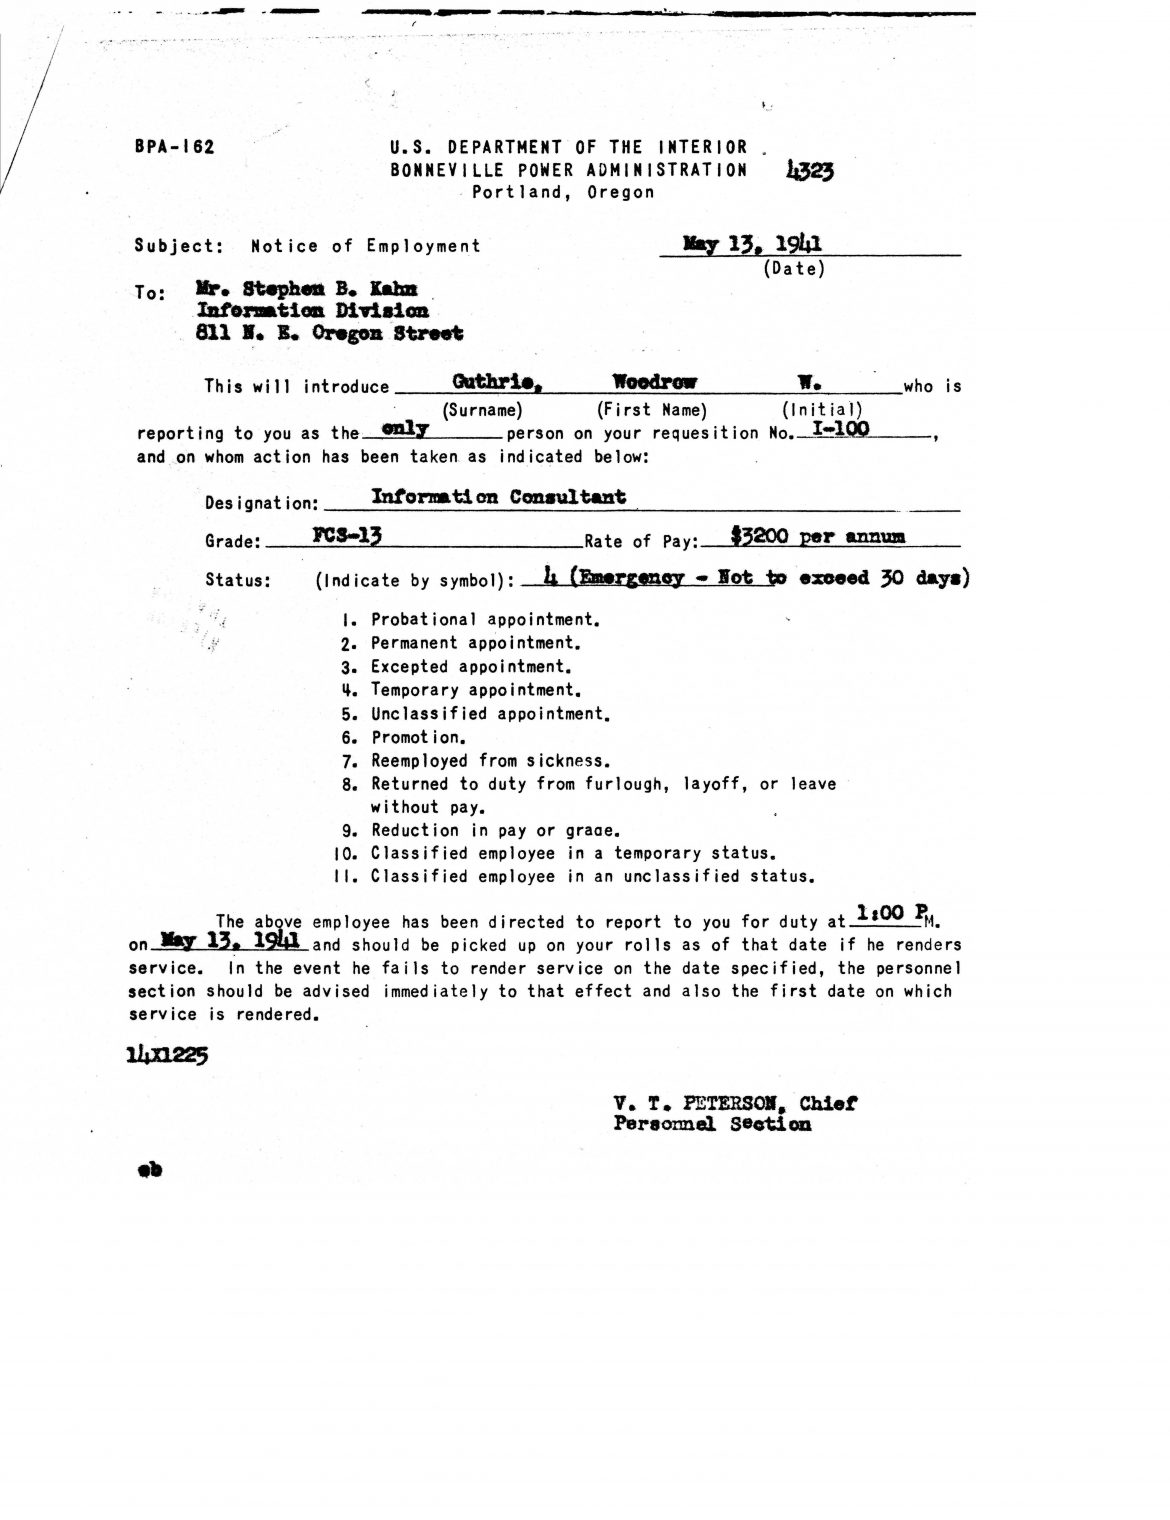 Woody Guthrie's Emergency Appointment as an Information Consultant at the BPA (courtesy of the BPA)